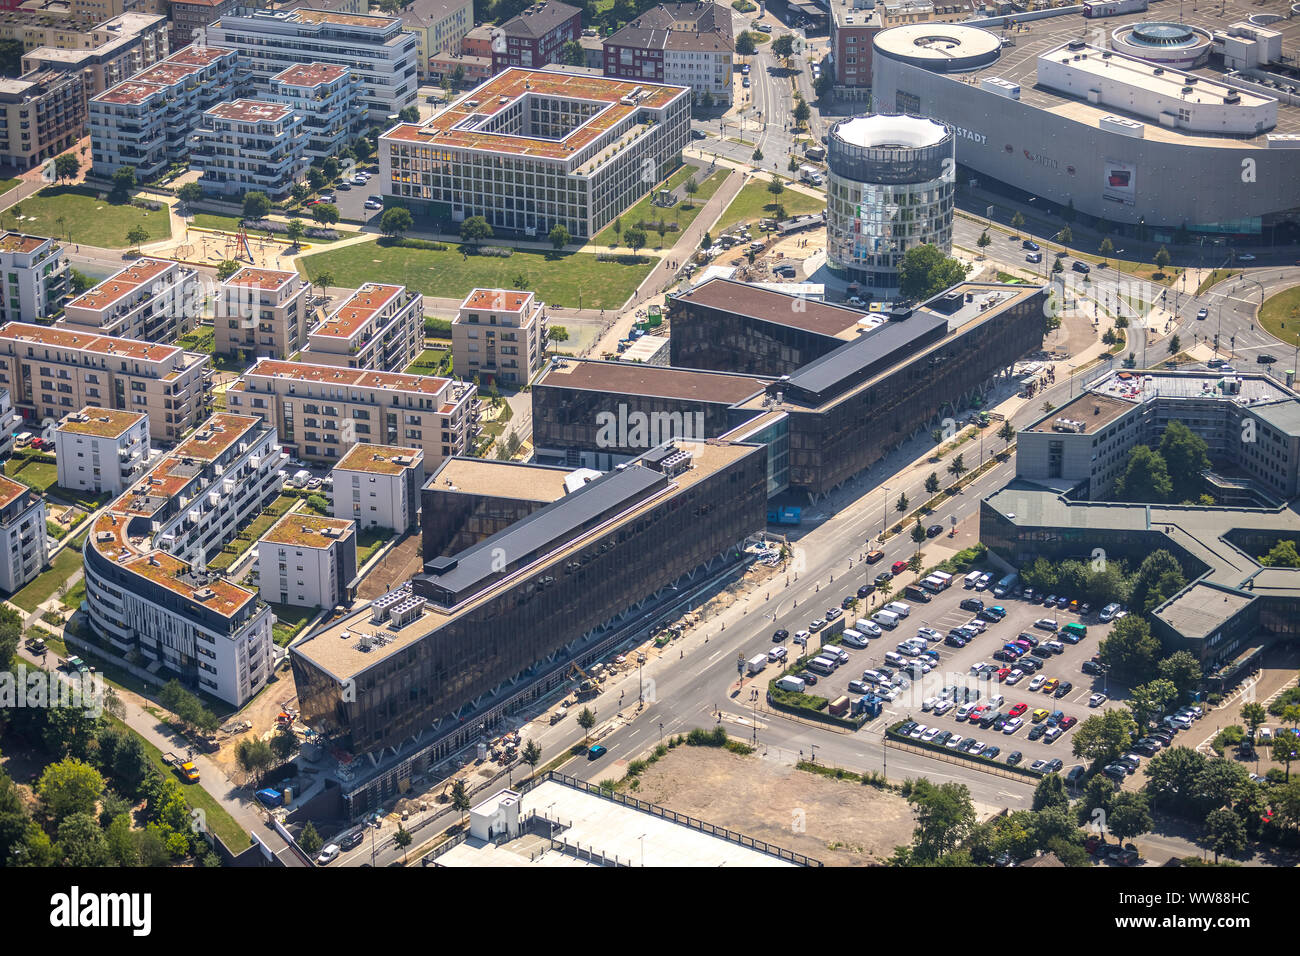 Aerial view, in the university quarter 'GrÃ¼ne Mitte Essen', one of the most modern corporate headquarters of a German media house, FUNKE MEDIENGRUPPE Essen, new head office and WAZ editorial office, Essen, Ruhrgebiet, North Rhine-Westphalia, Germany Stock Photo